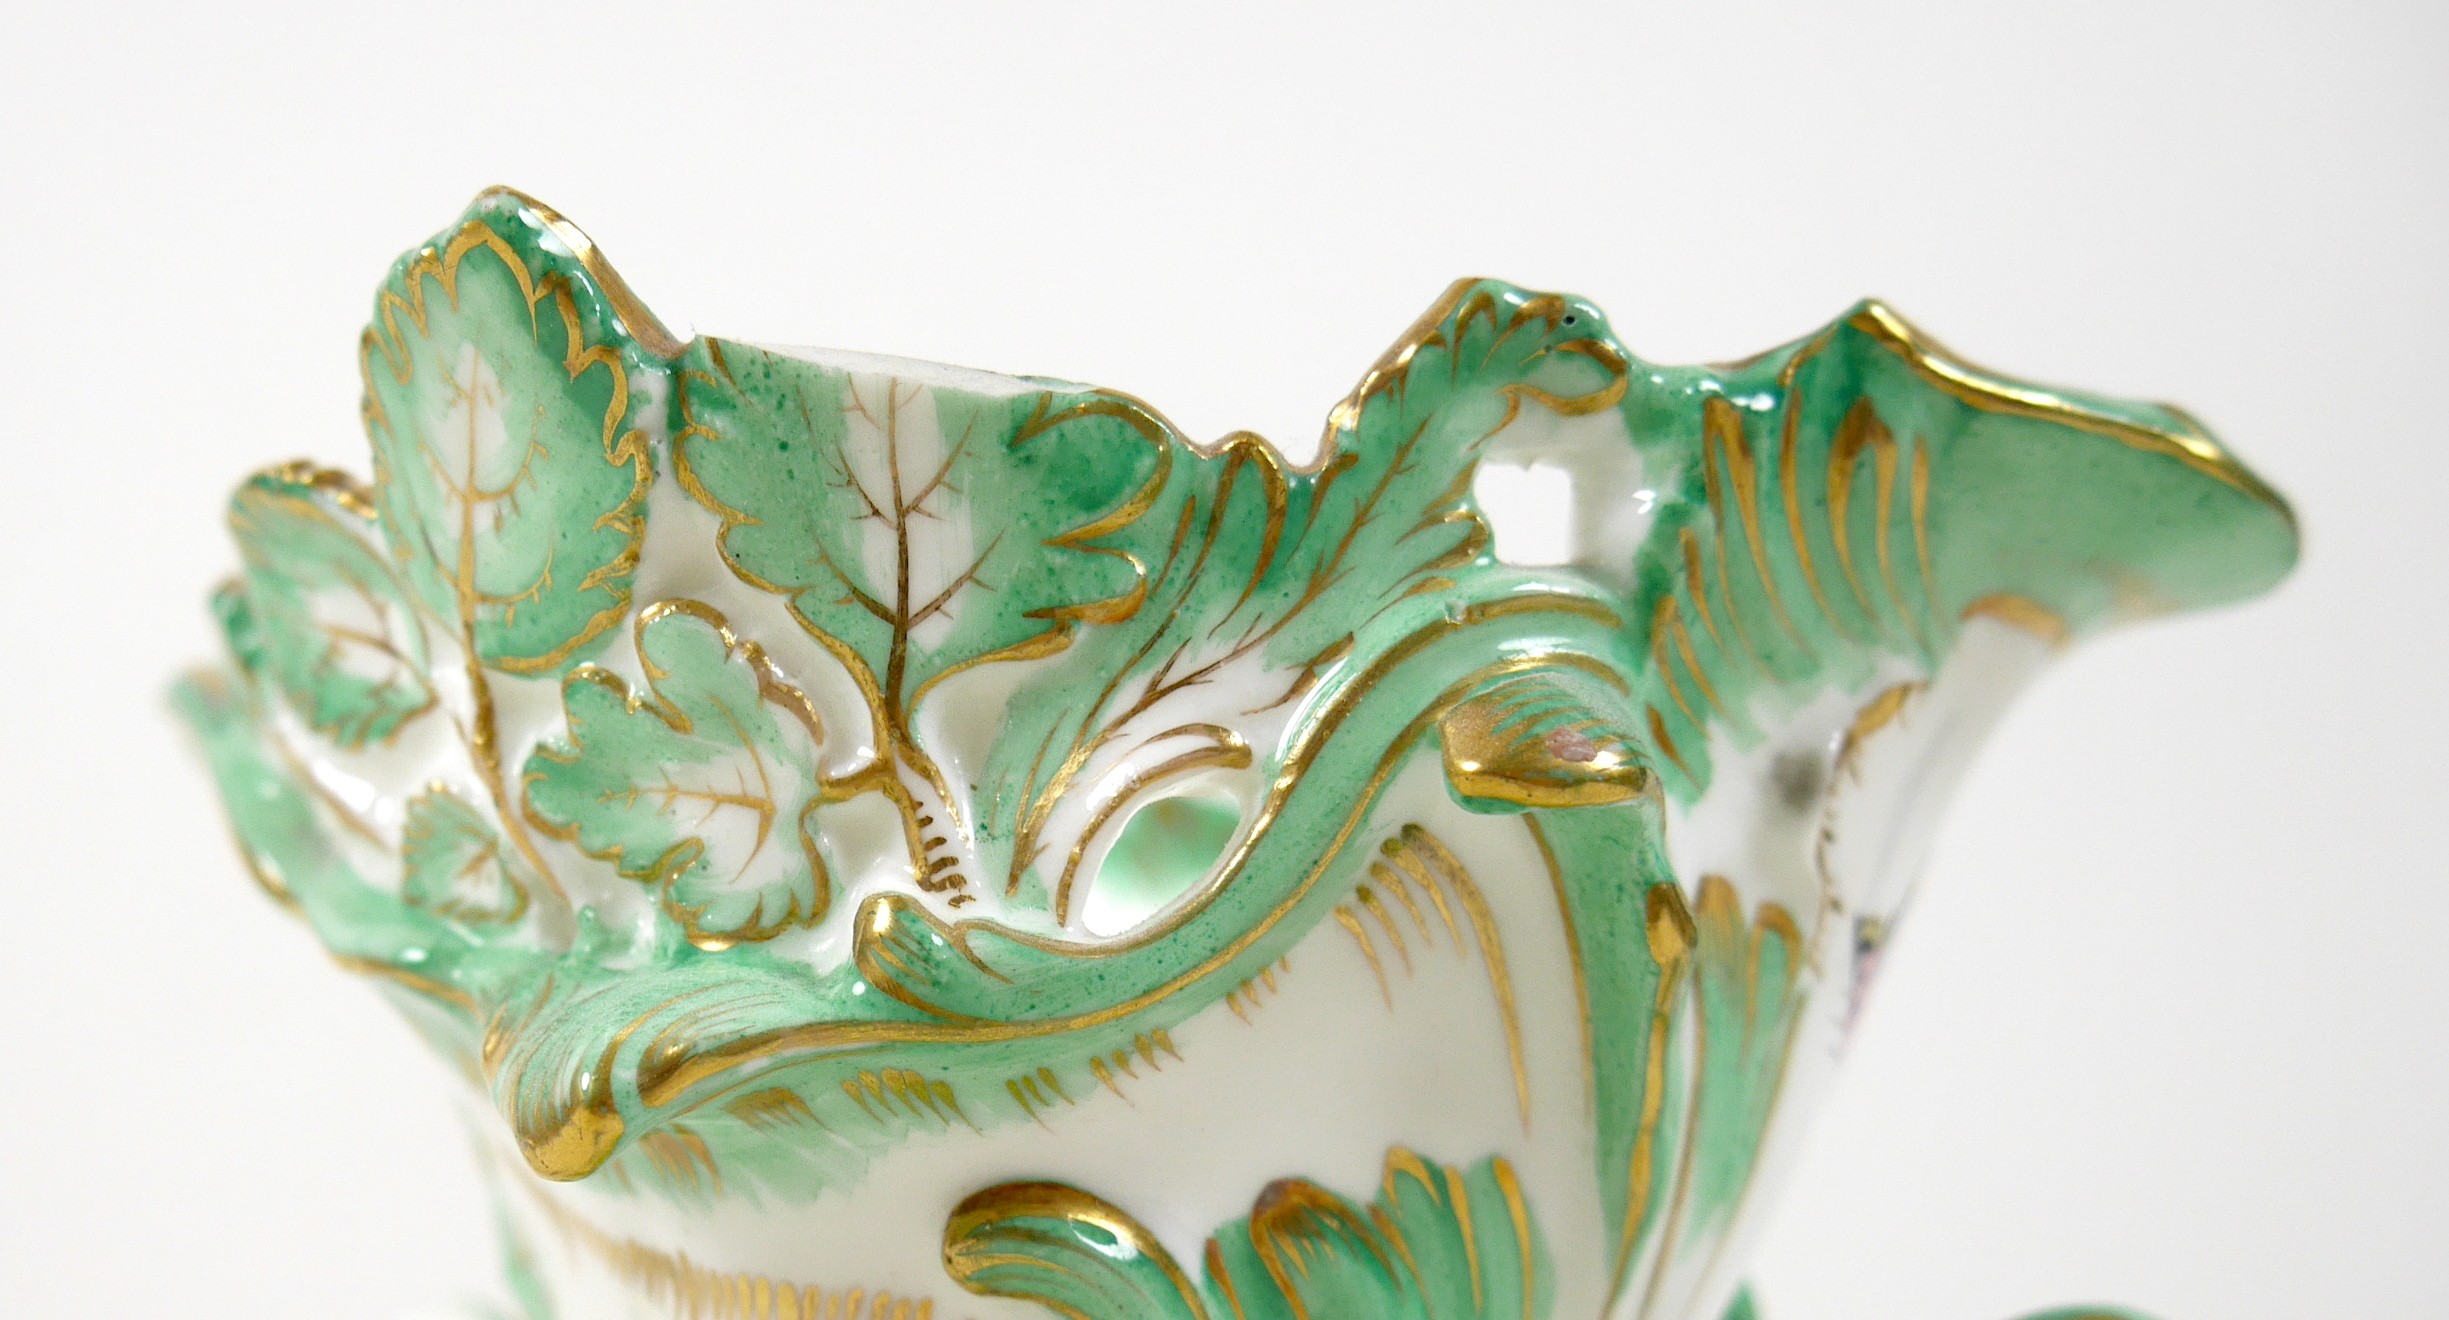 A mid 19th century porcelain Minton vase, decorated in Rococco taste with green and gilt scrolls and - Image 4 of 5